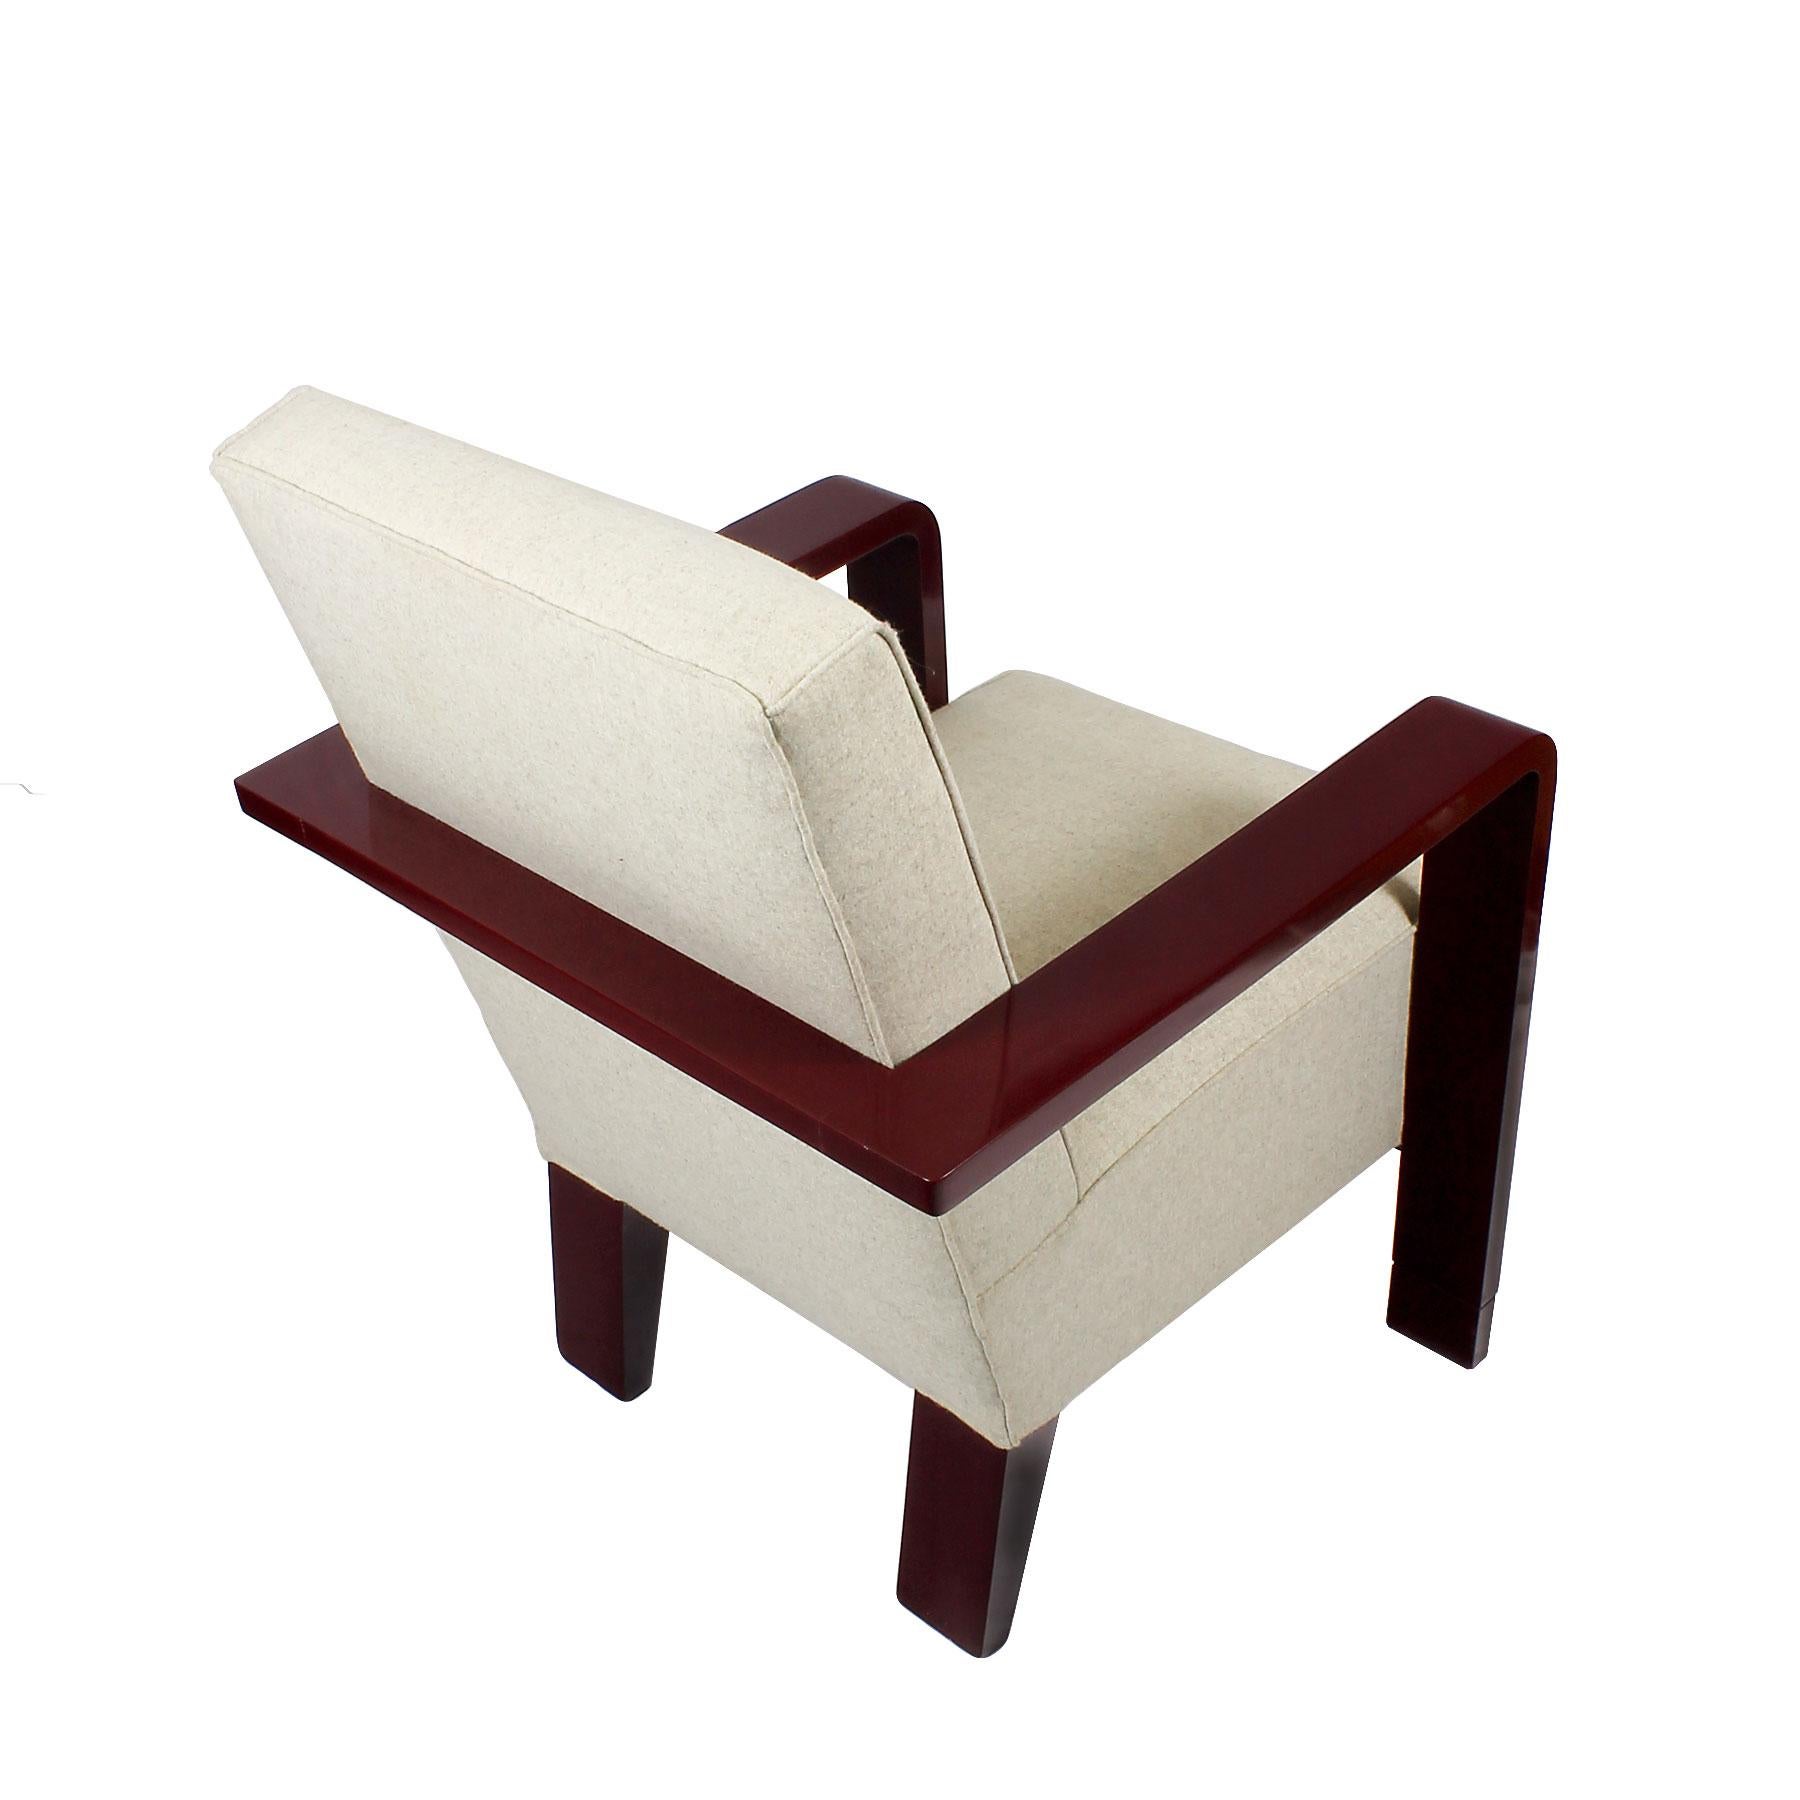 1930s Art Deco Armchair, Lacquered Beech, Off-White Wool - Belgium For Sale 2